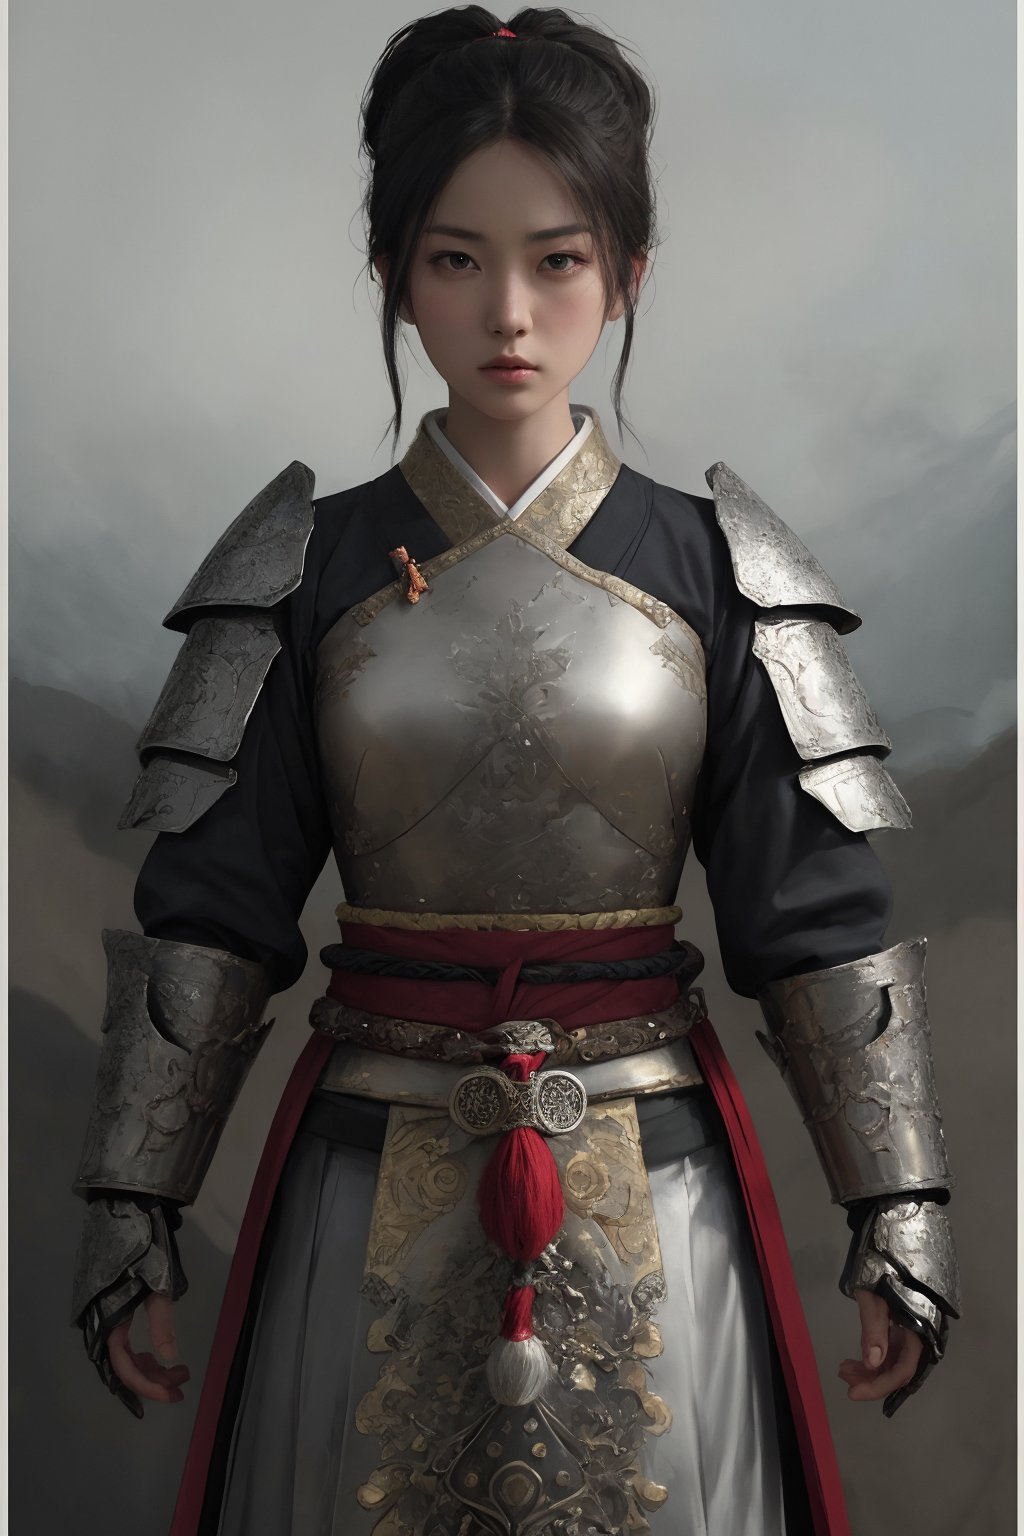 physically-based rendering, portrait, ultra-fine painting, extreme detail description, Akira Kurosawa's movie-style poster features a full-body shot of a 28-year-old girl, embodying the samurai spirit of Japan's Warring States Period, An enigmatic female samurai warrior, clad in ornate armor , This striking depiction, seemingly bursting with unspoken power, illustrates a fierce and formidable female warrior in the midst of battle. The image, likely a detailed painting, showcases the intensity of the female samurai's gaze and the intricate craftsmanship of his armor. Each intricately depicted detail mesmerizes the viewer, immersing them in the extraordinary skill and artistry captured in this remarkable 